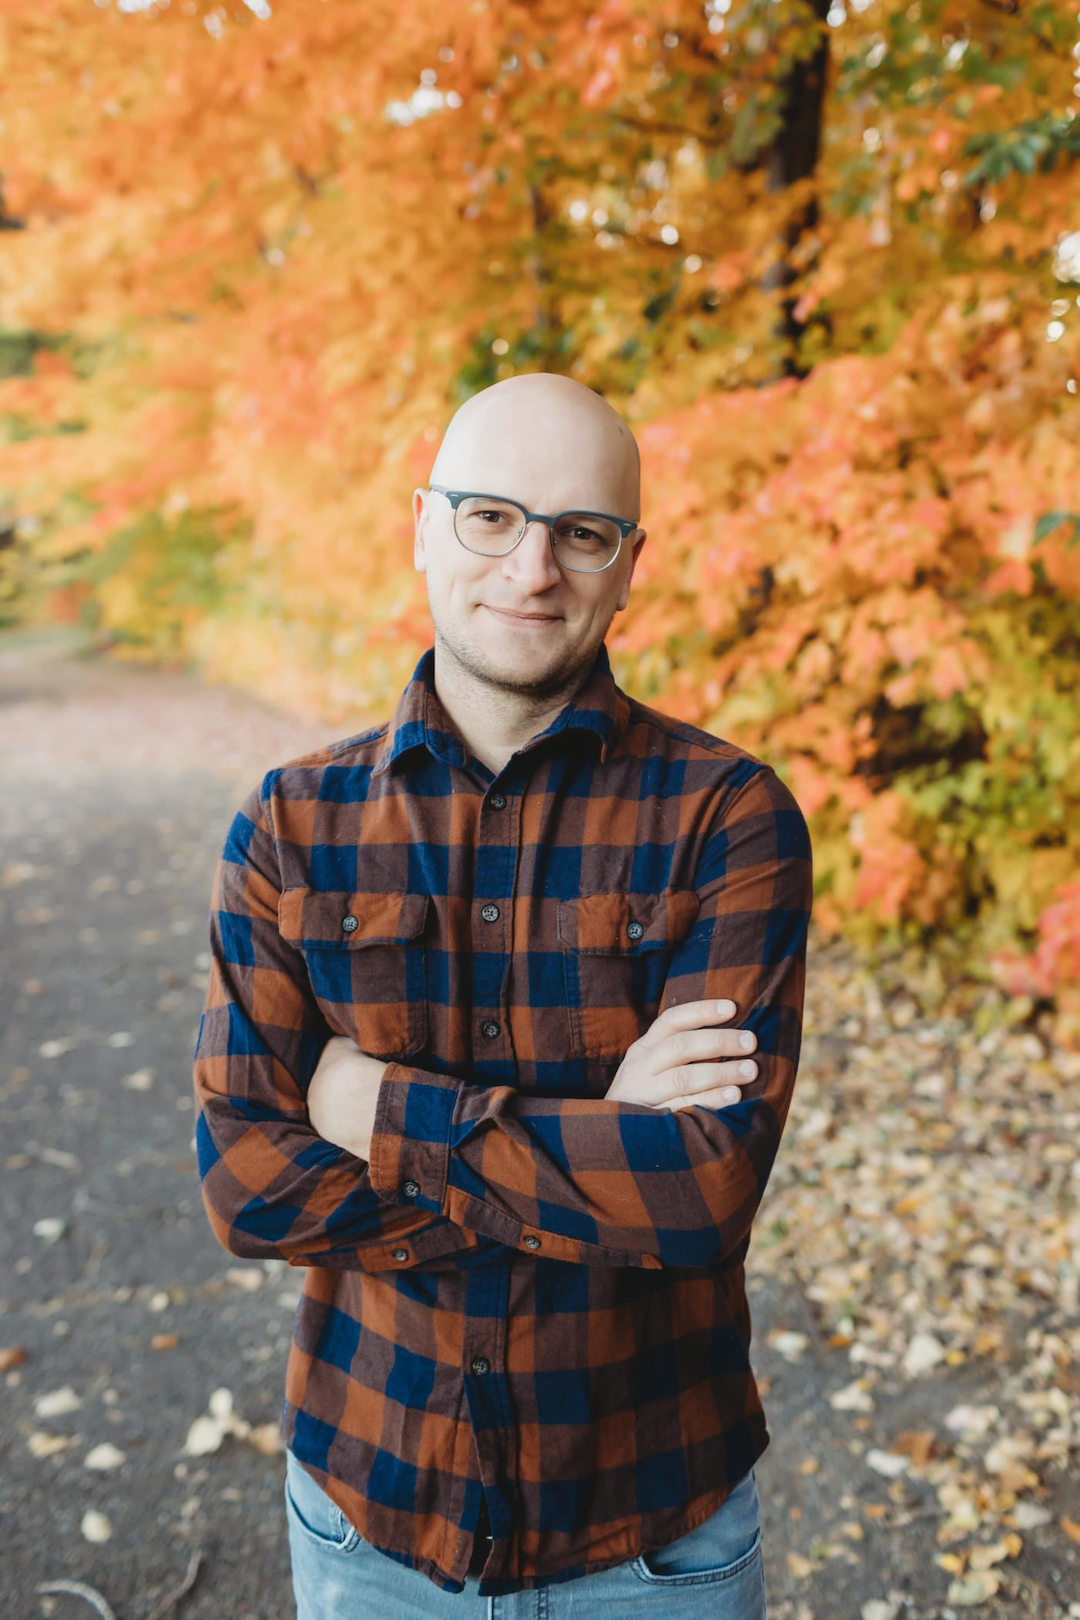 Target Principal Engineer Brian Muenzenmeyer, a man with light skin, wearing glasses and a button down flannel shirt and smiling with his arms crossed against a background of colorful fall leaves